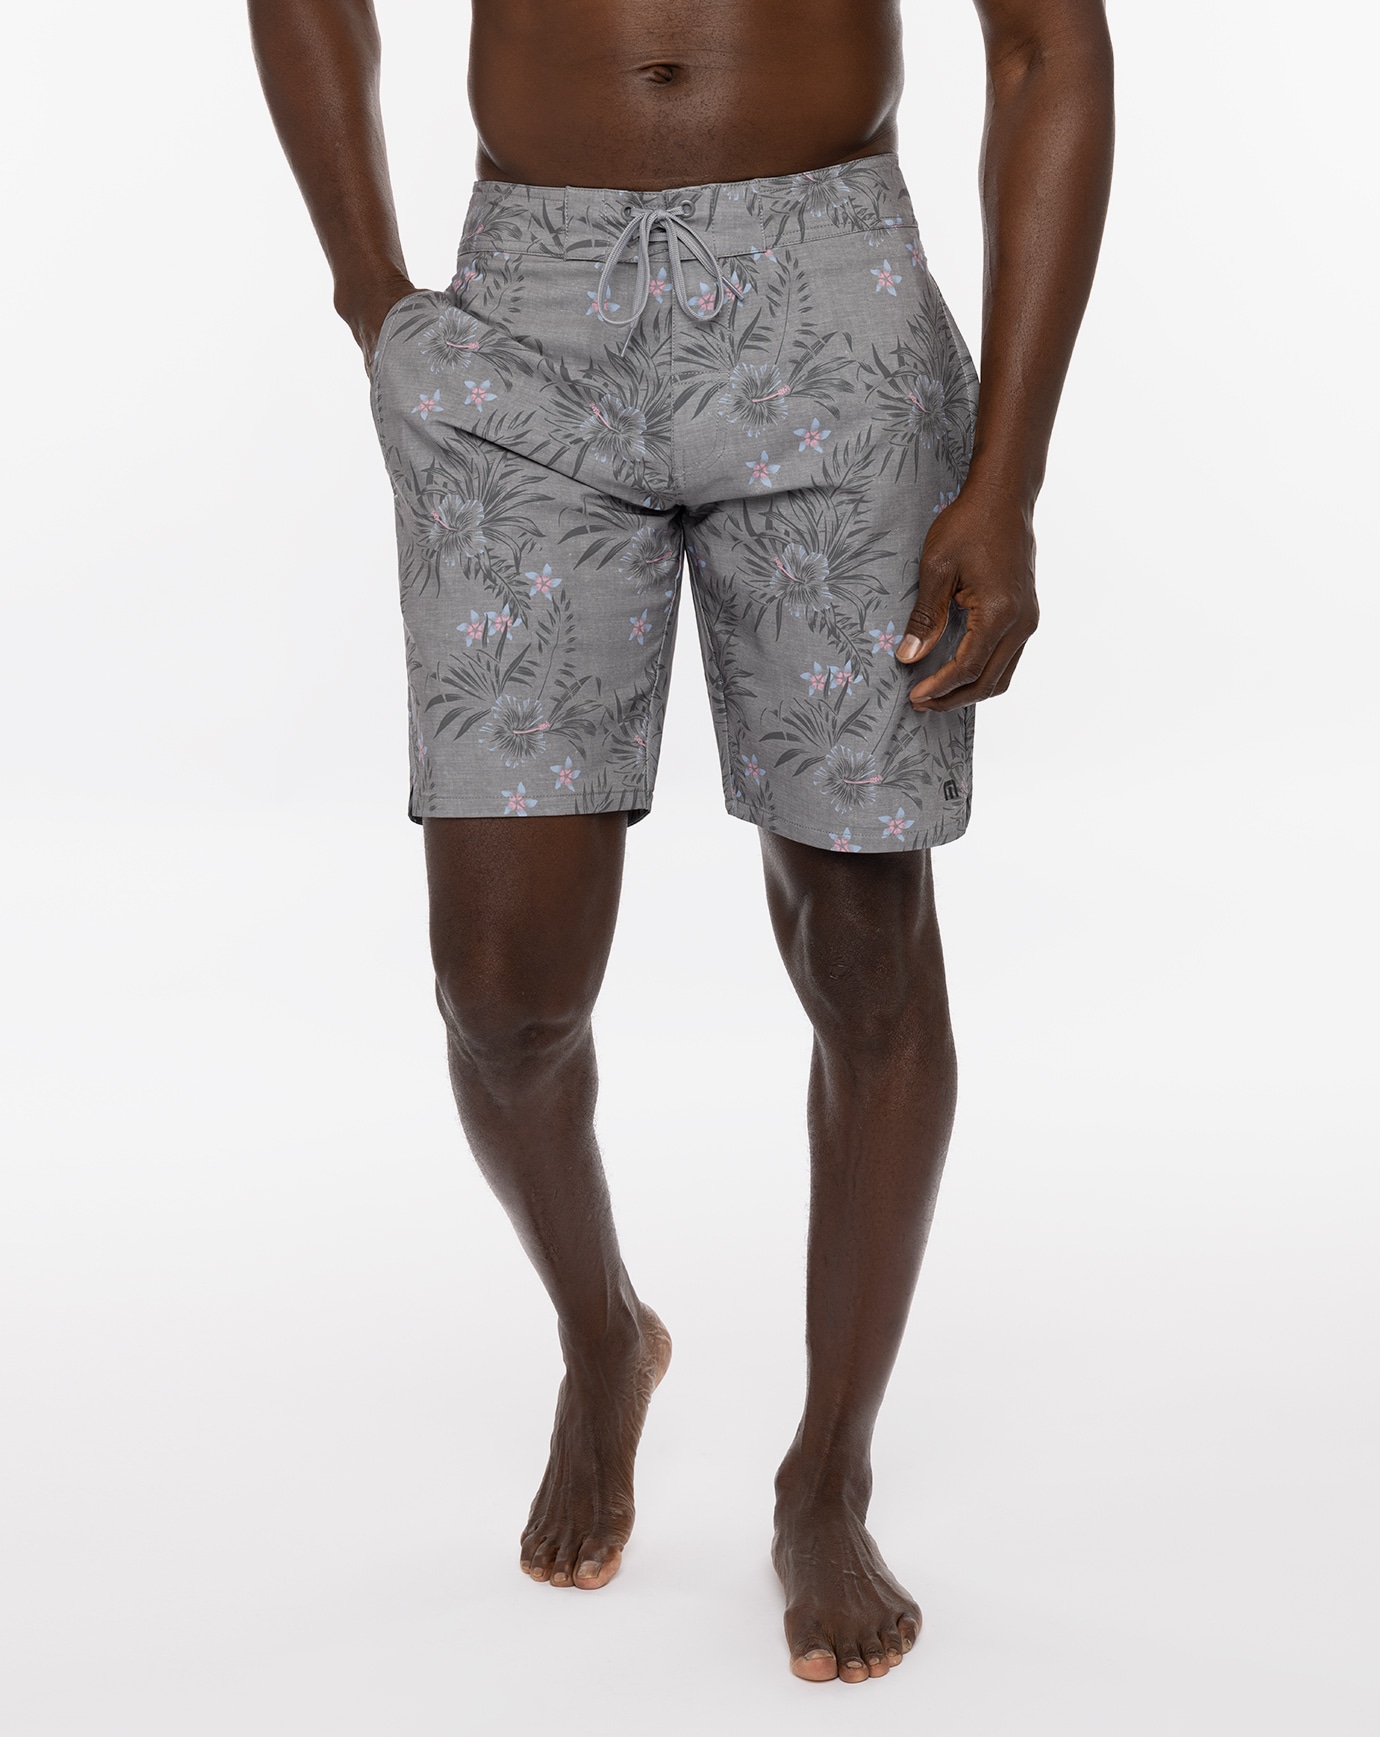 Related Product - WESTERN WAY BOARDSHORT